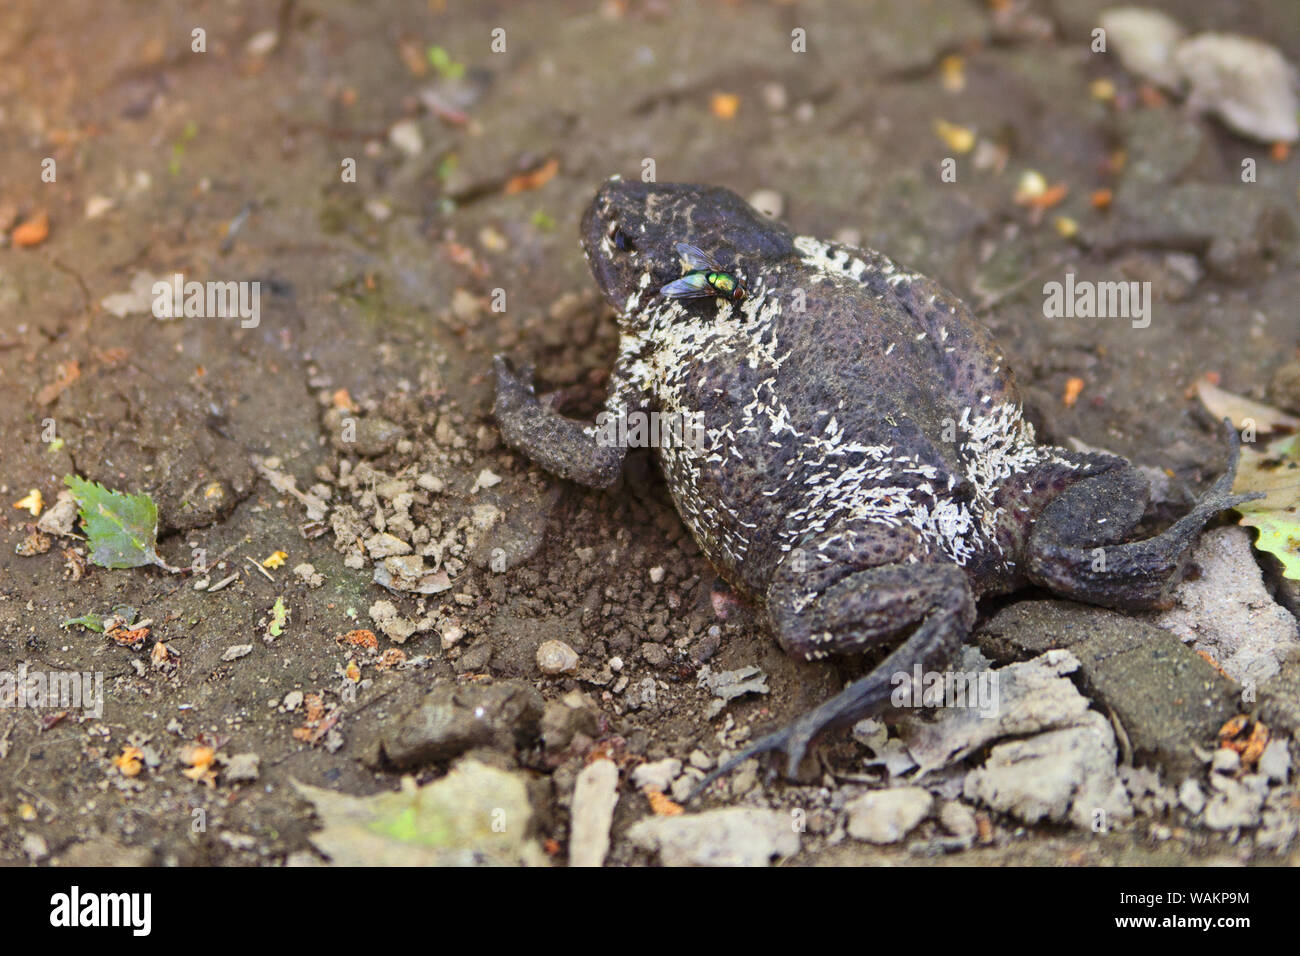 The green fly and insect larvae on the dead toad Stock Photo